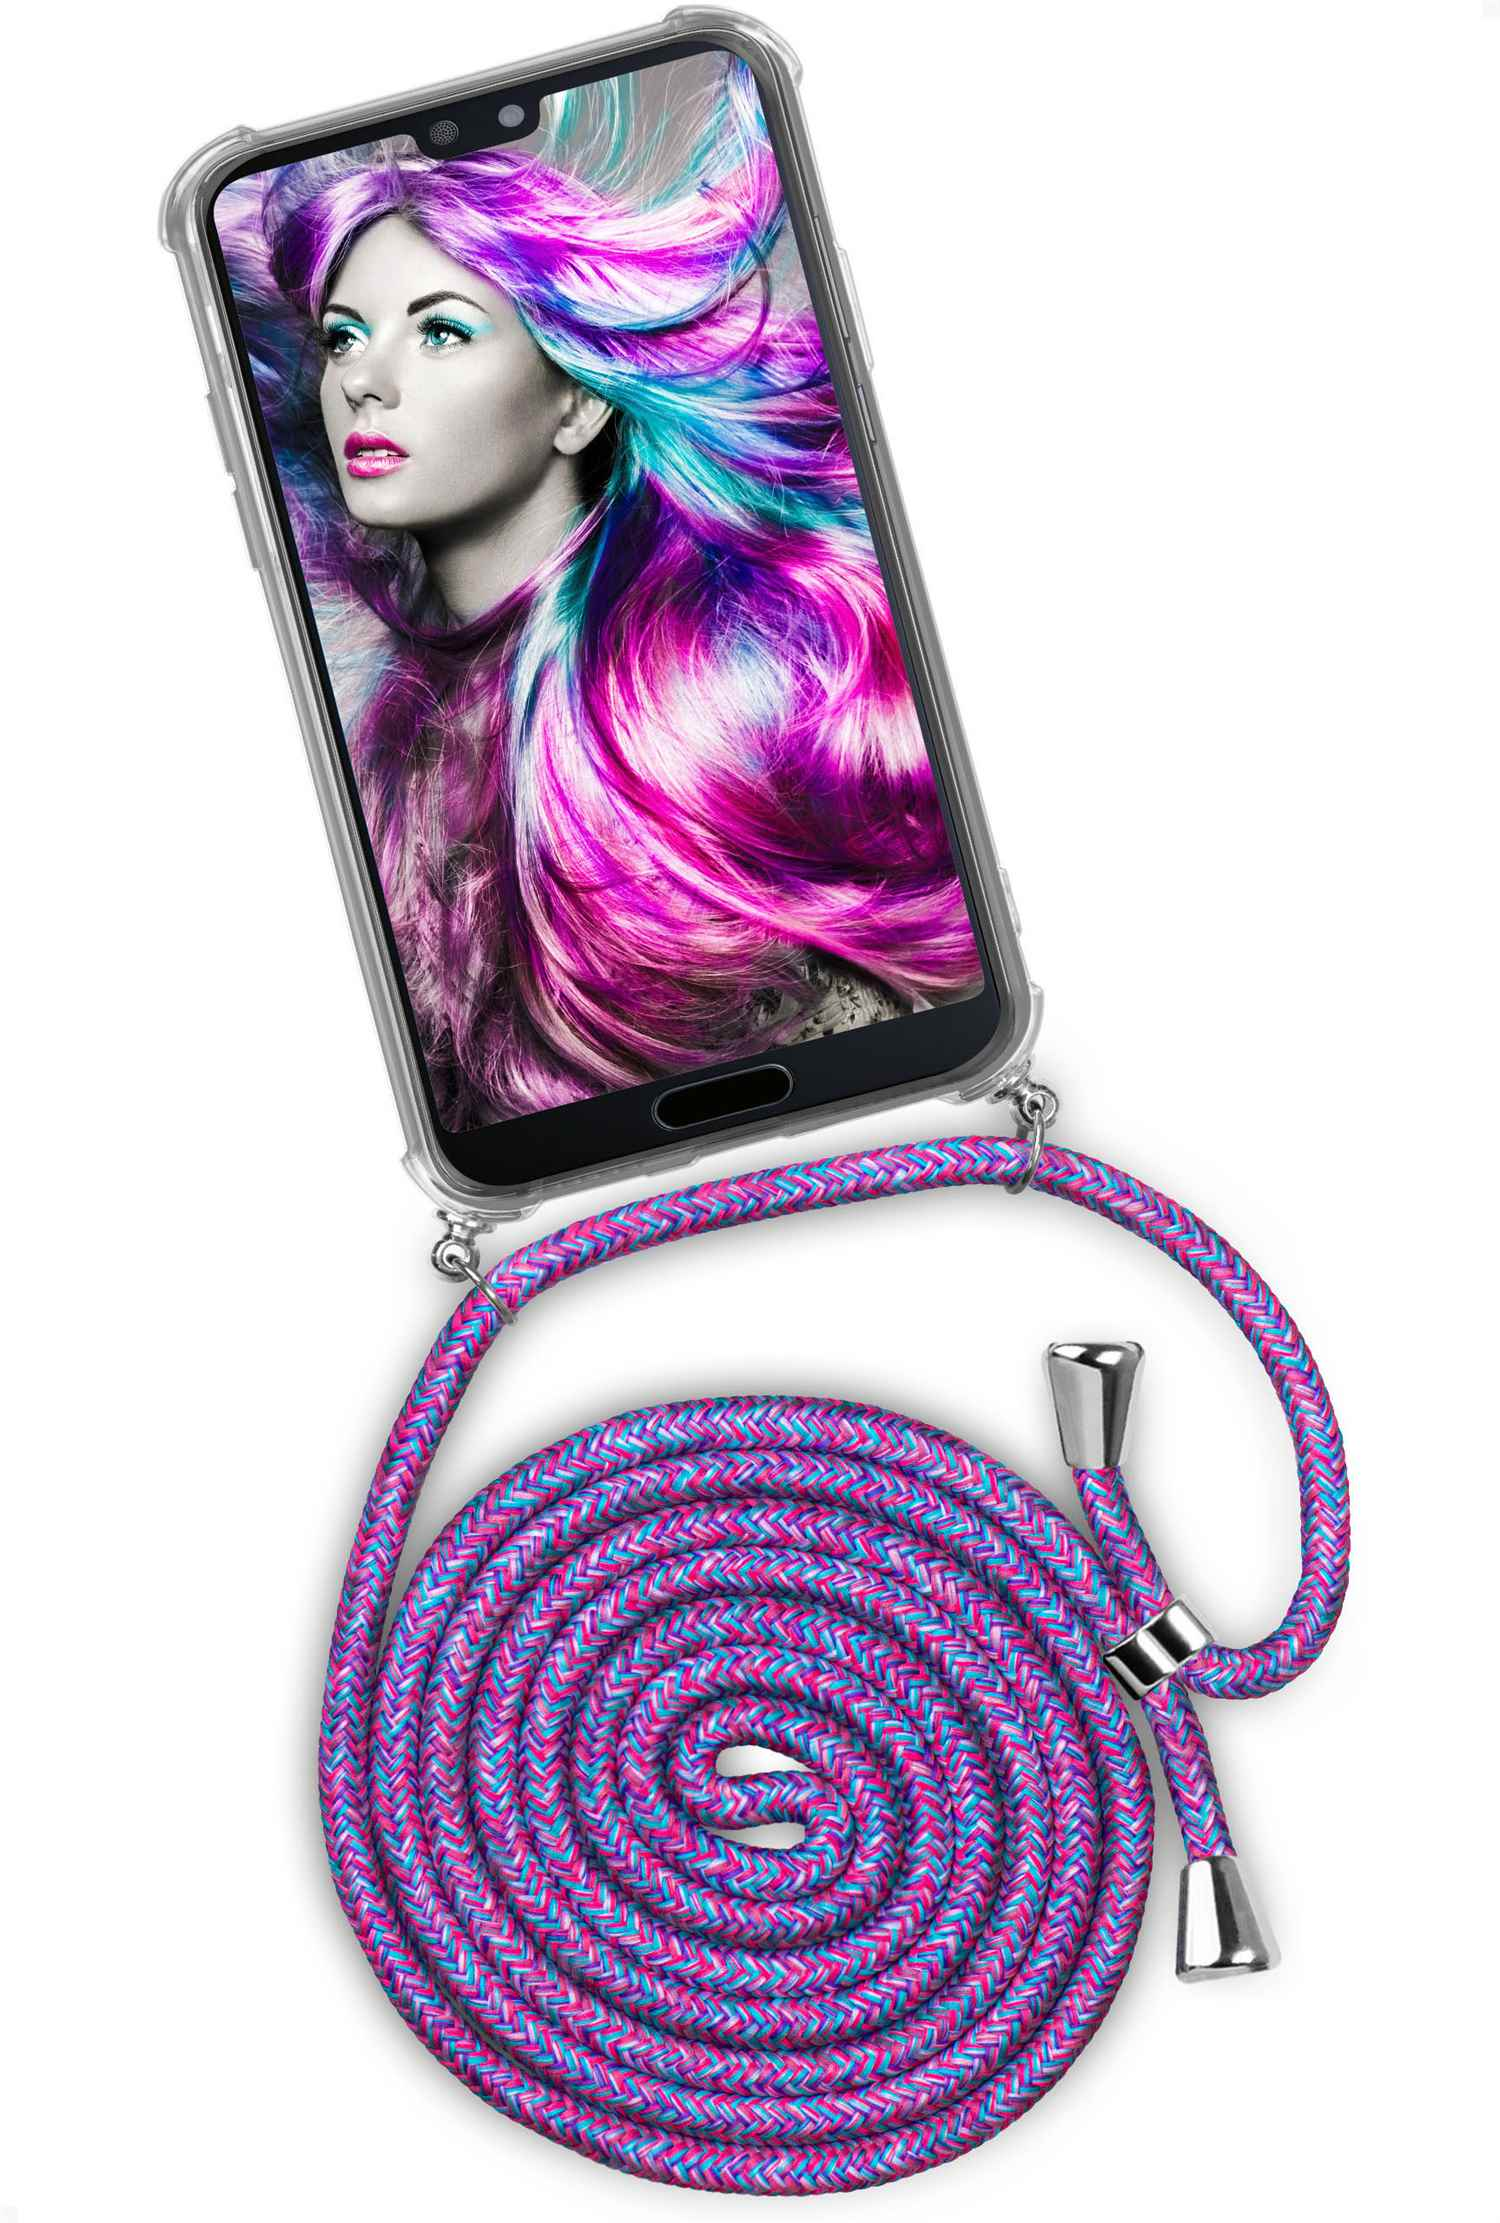 ONEFLOW Twist Crazy Case, (Silber) Huawei, Unicorn Pro, P20 Backcover